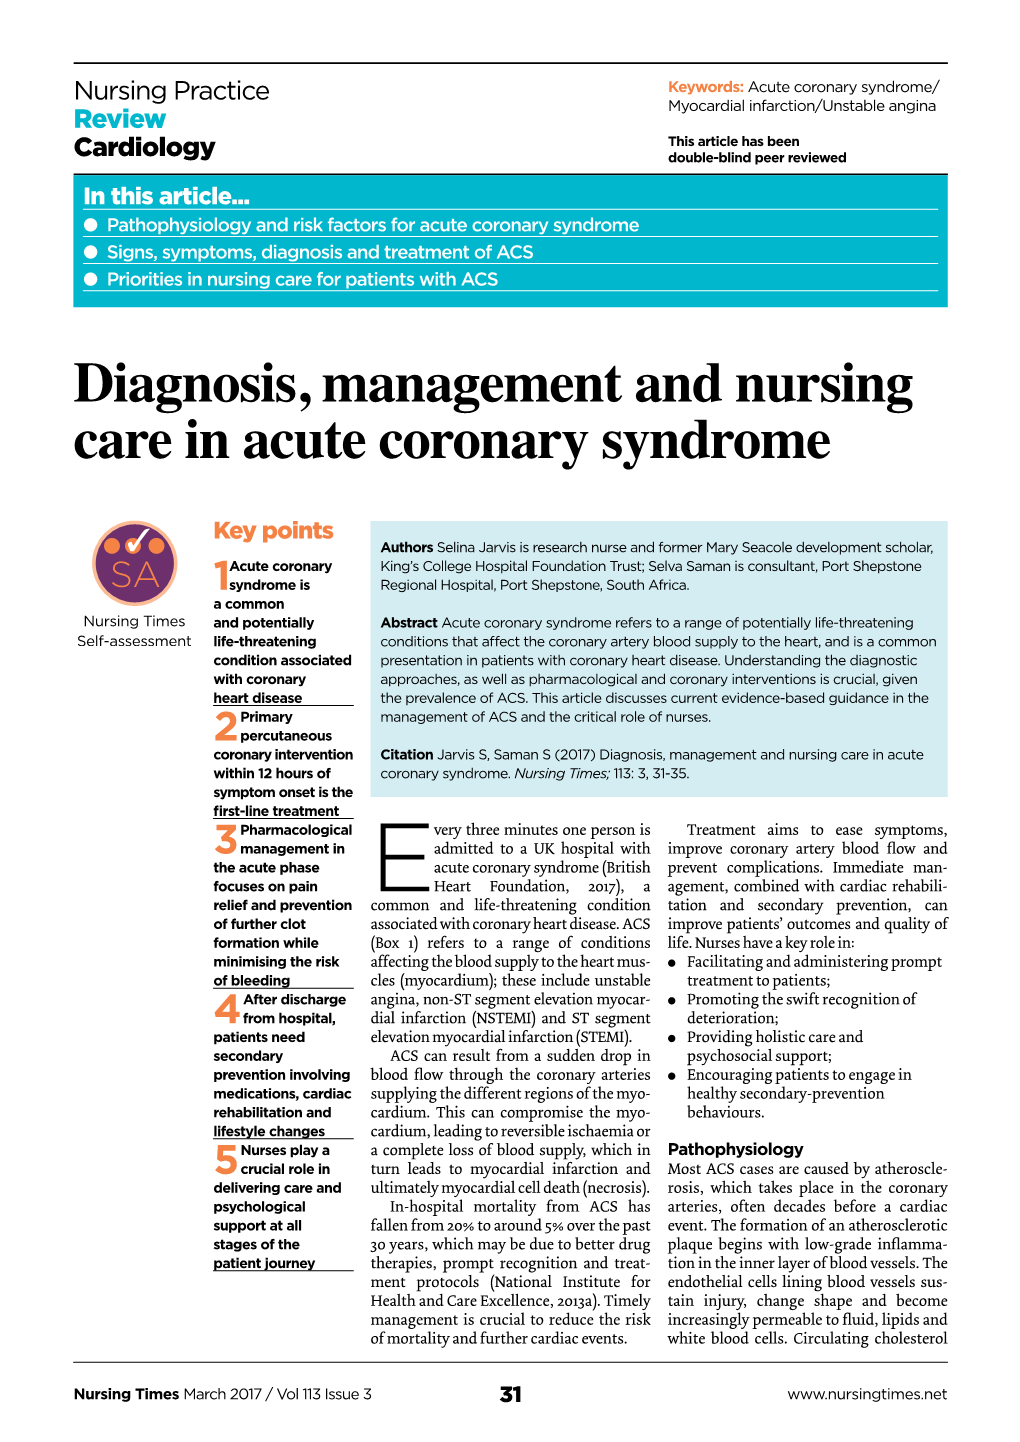 Diagnosis, Management and Nursing Care in Acute Coronary Syndrome